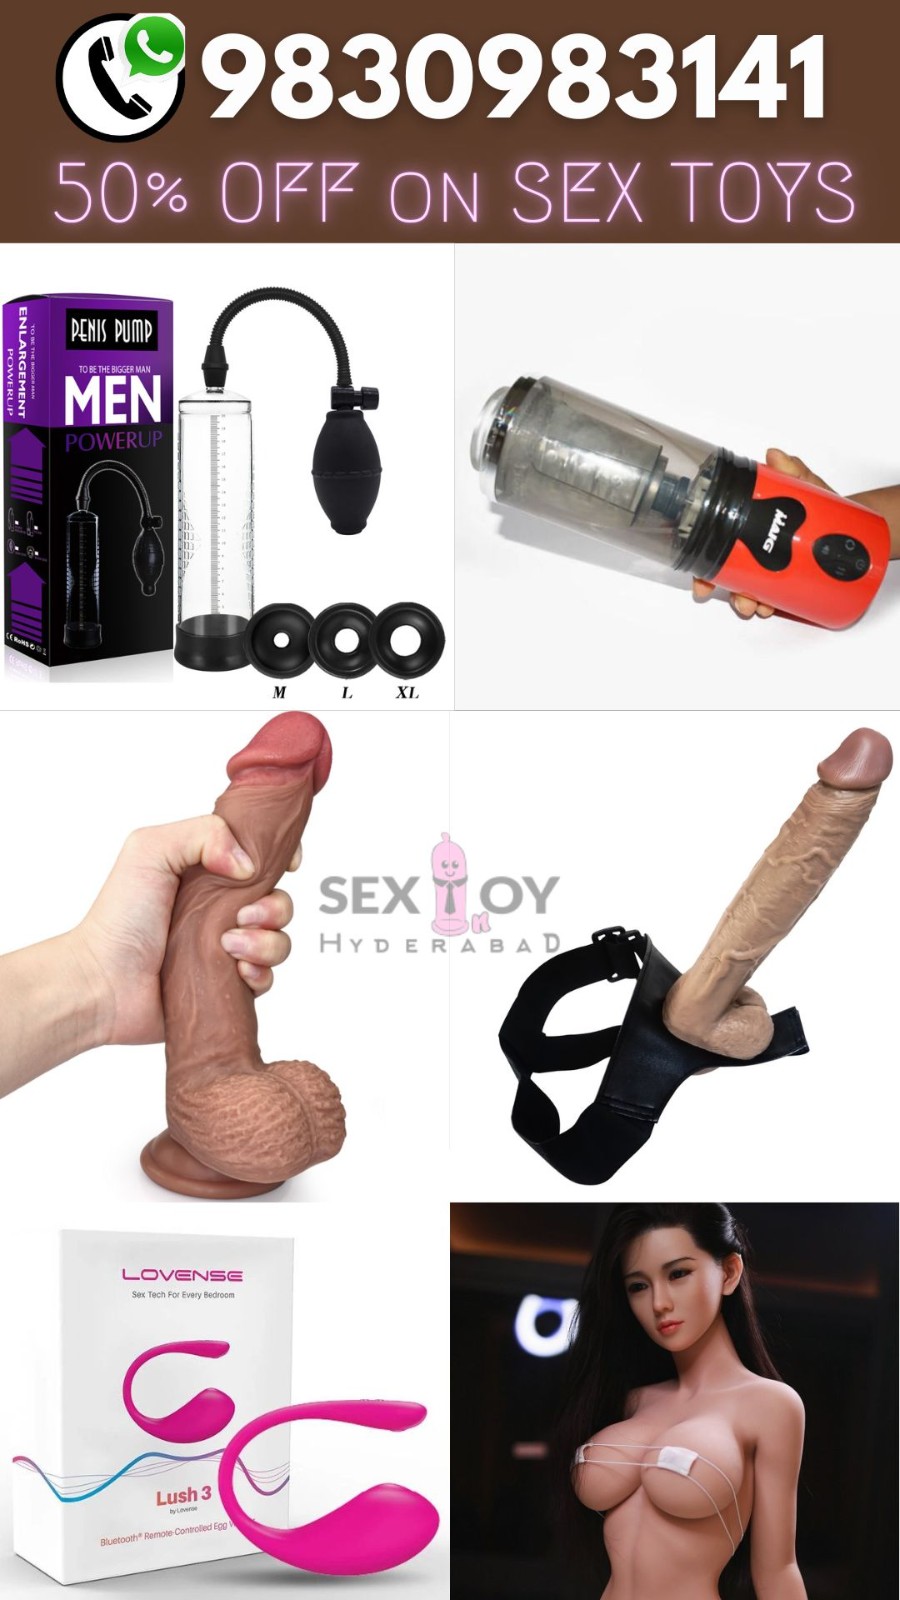 Grab Cheapest Deals On Sex Toys During Weekend Bonanza Offer | Call 9830983141